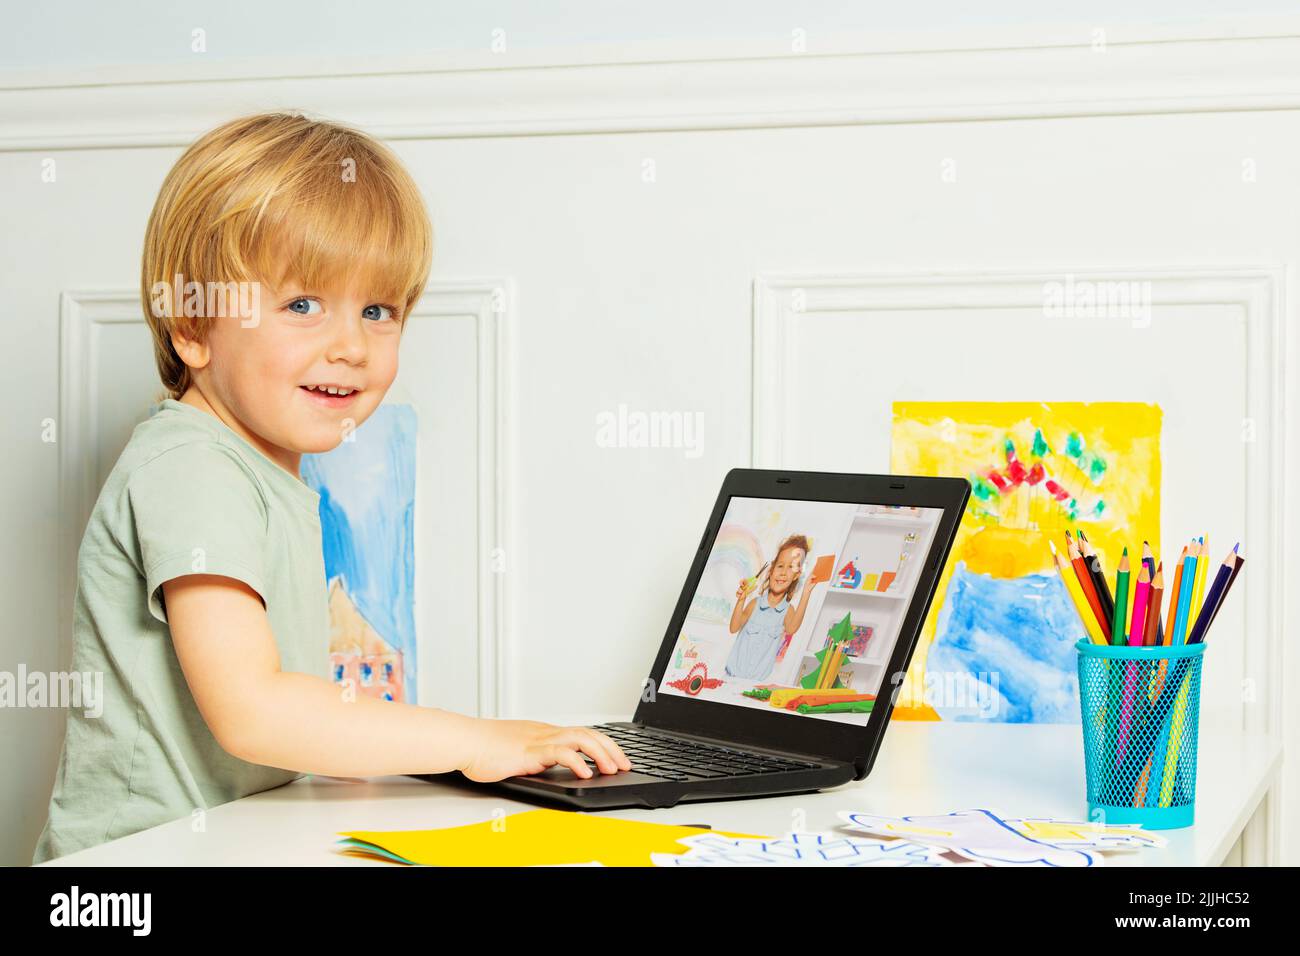 Cute smiling blond boy in headphones using laptop for education Stock Photo